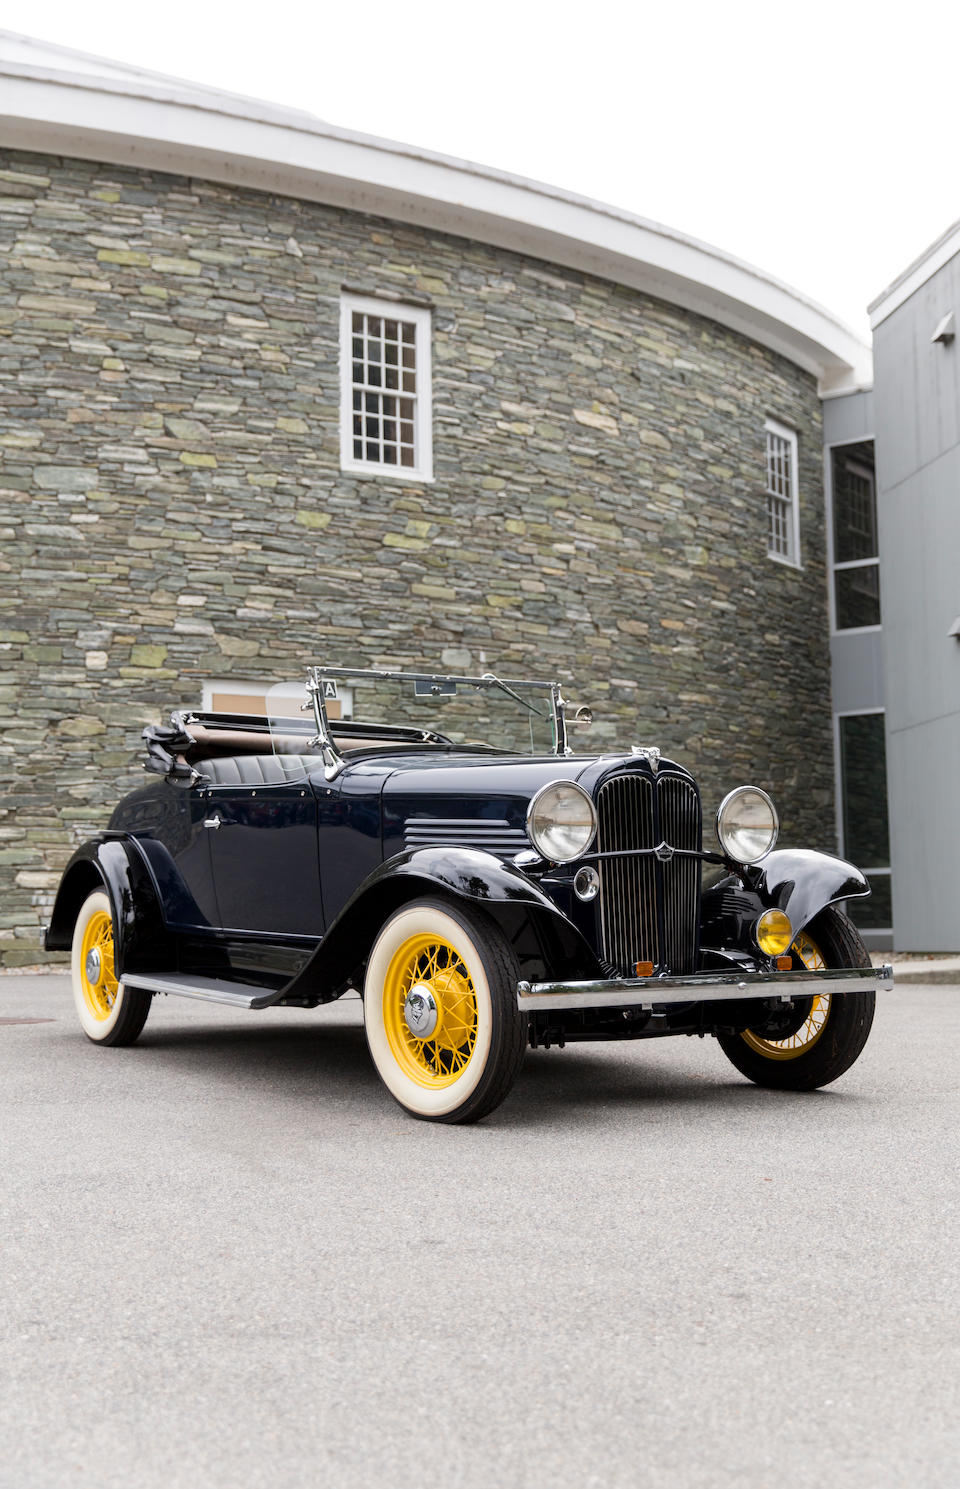 <i>Sold to benefit the Heritage Museums and Gardens</i><BR /><B>1932  Willys  6-90 Silver Streak Rumble Seat Roadster</B><BR />Chassis no. 8610<BR />Engine no. 8714